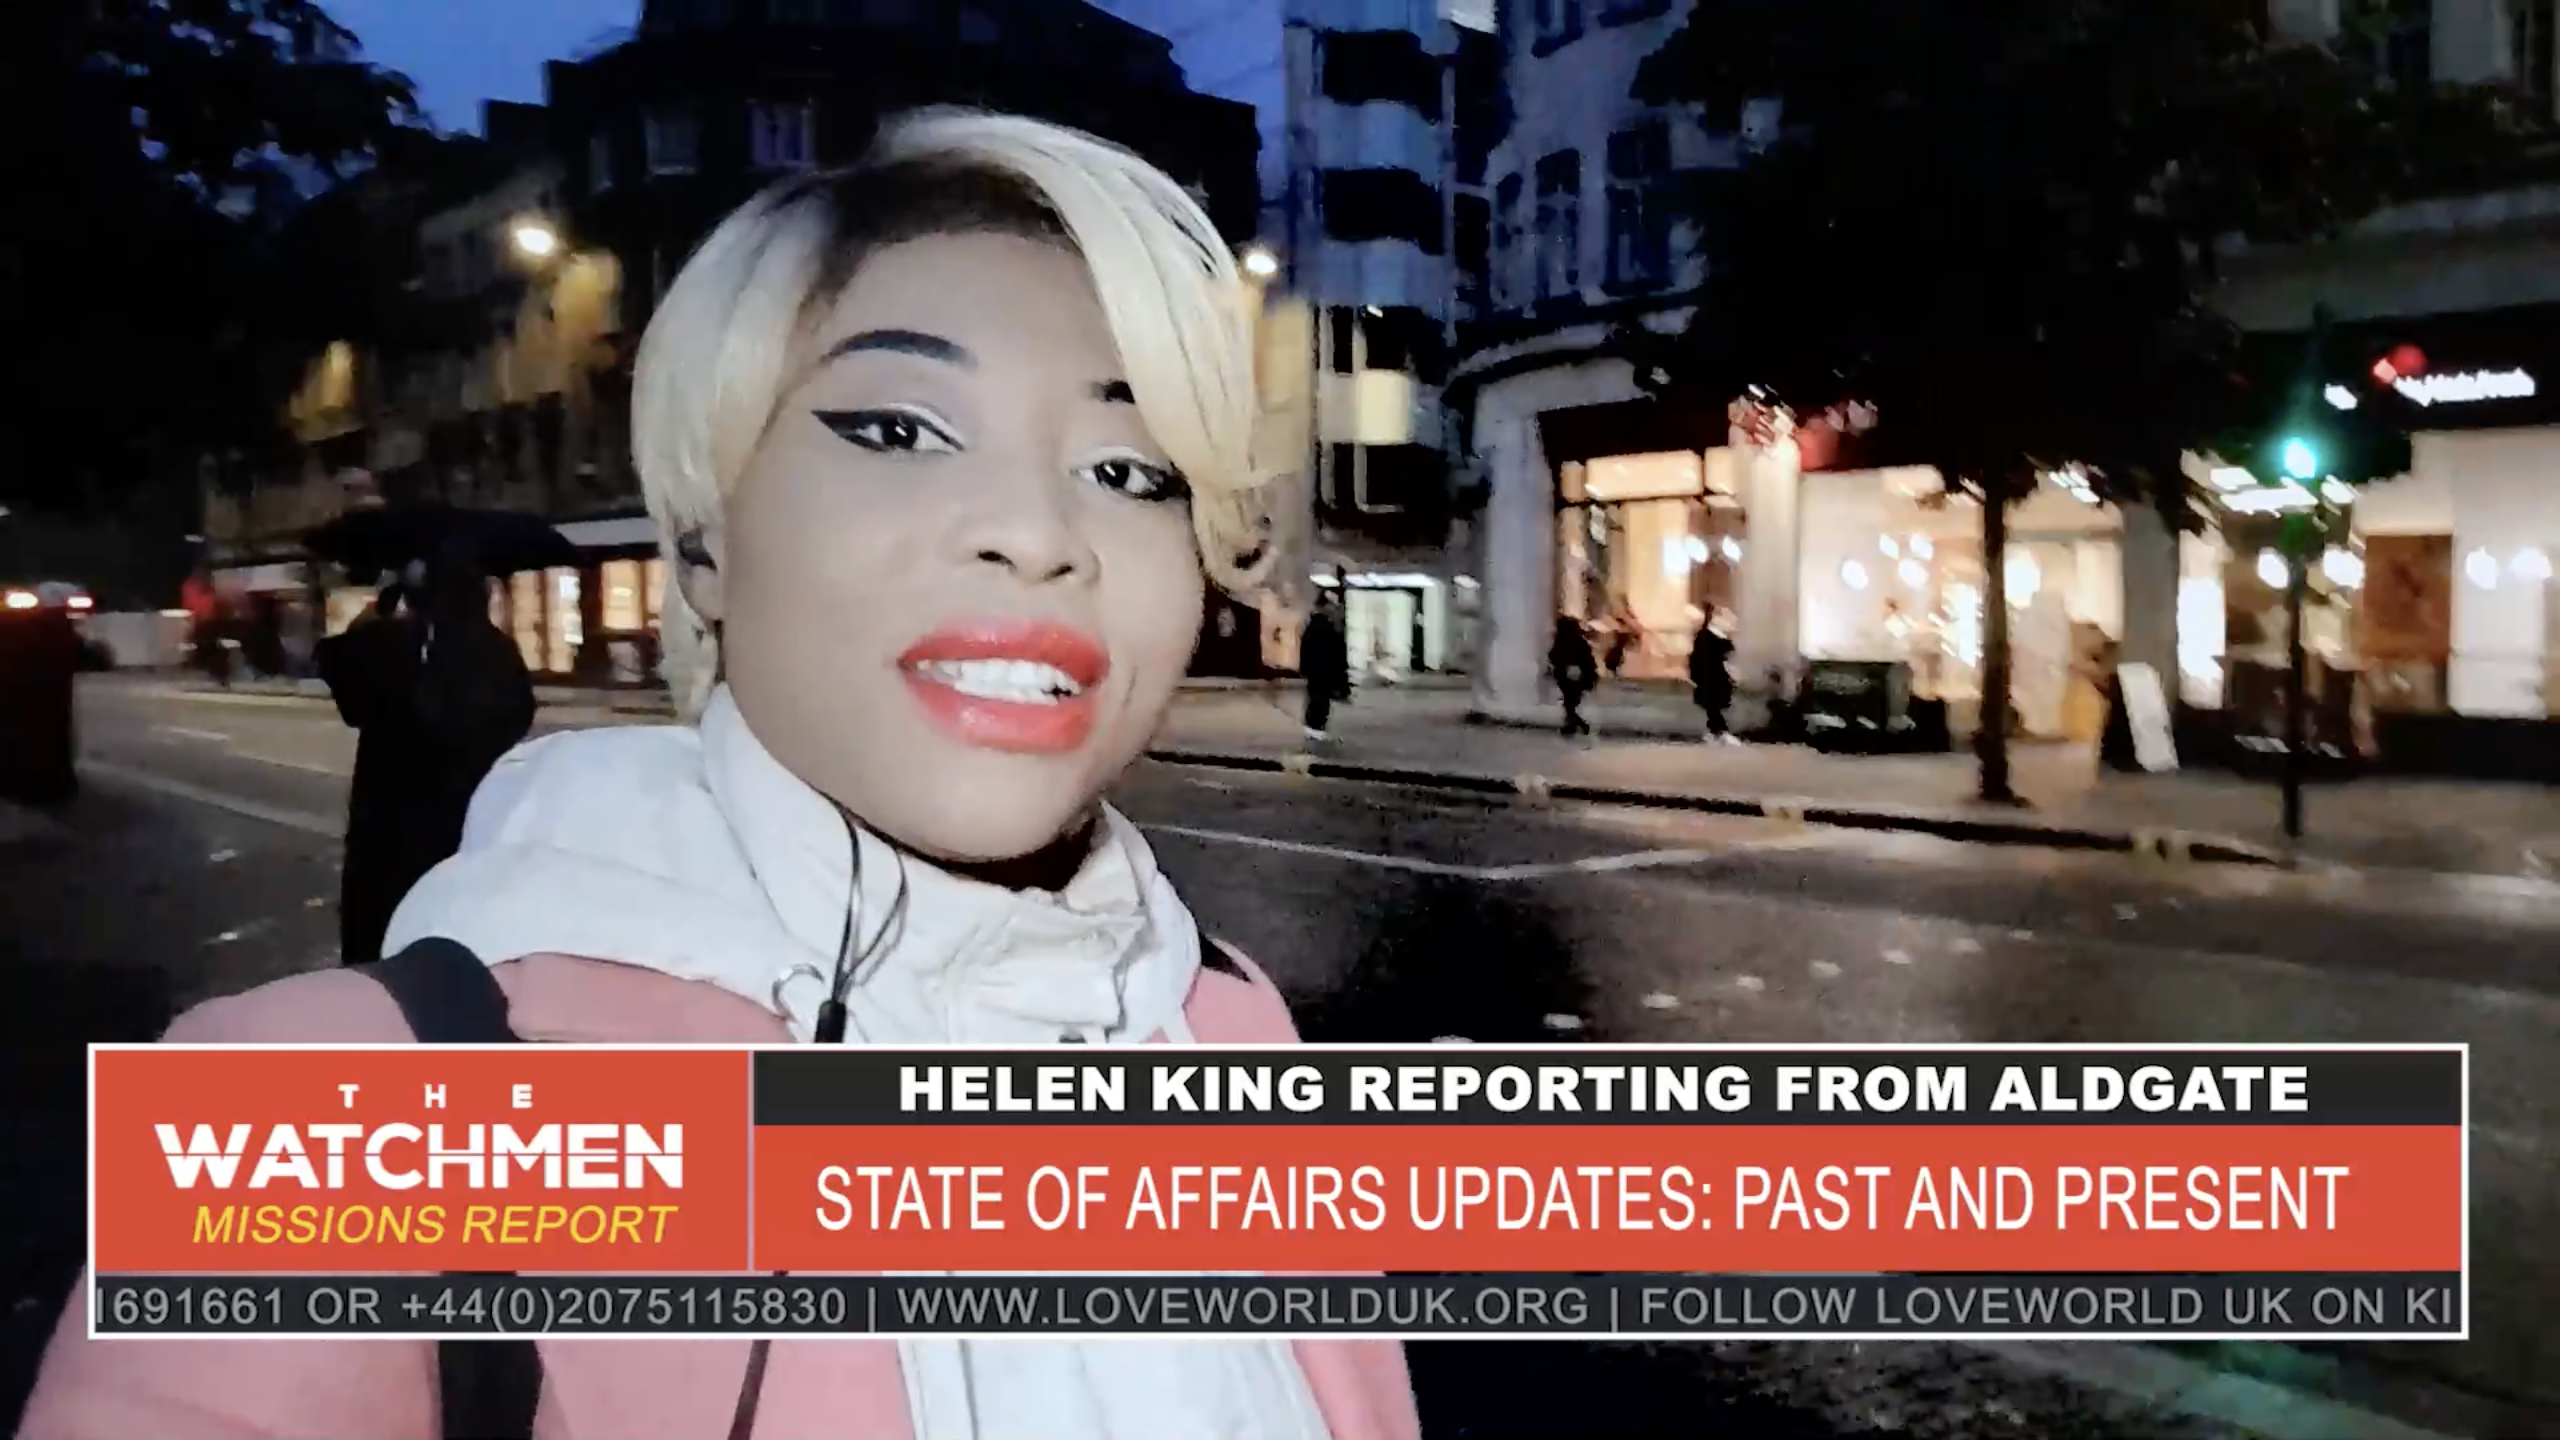 THE WATCHMEN_EP 104: HELEN KING'S SPECIAL REPORTS IN ICONIC LOCATIONS_LIVERPOOL STREET, ALDGATE, BARBICAN, FARRINGDON, PRESTON